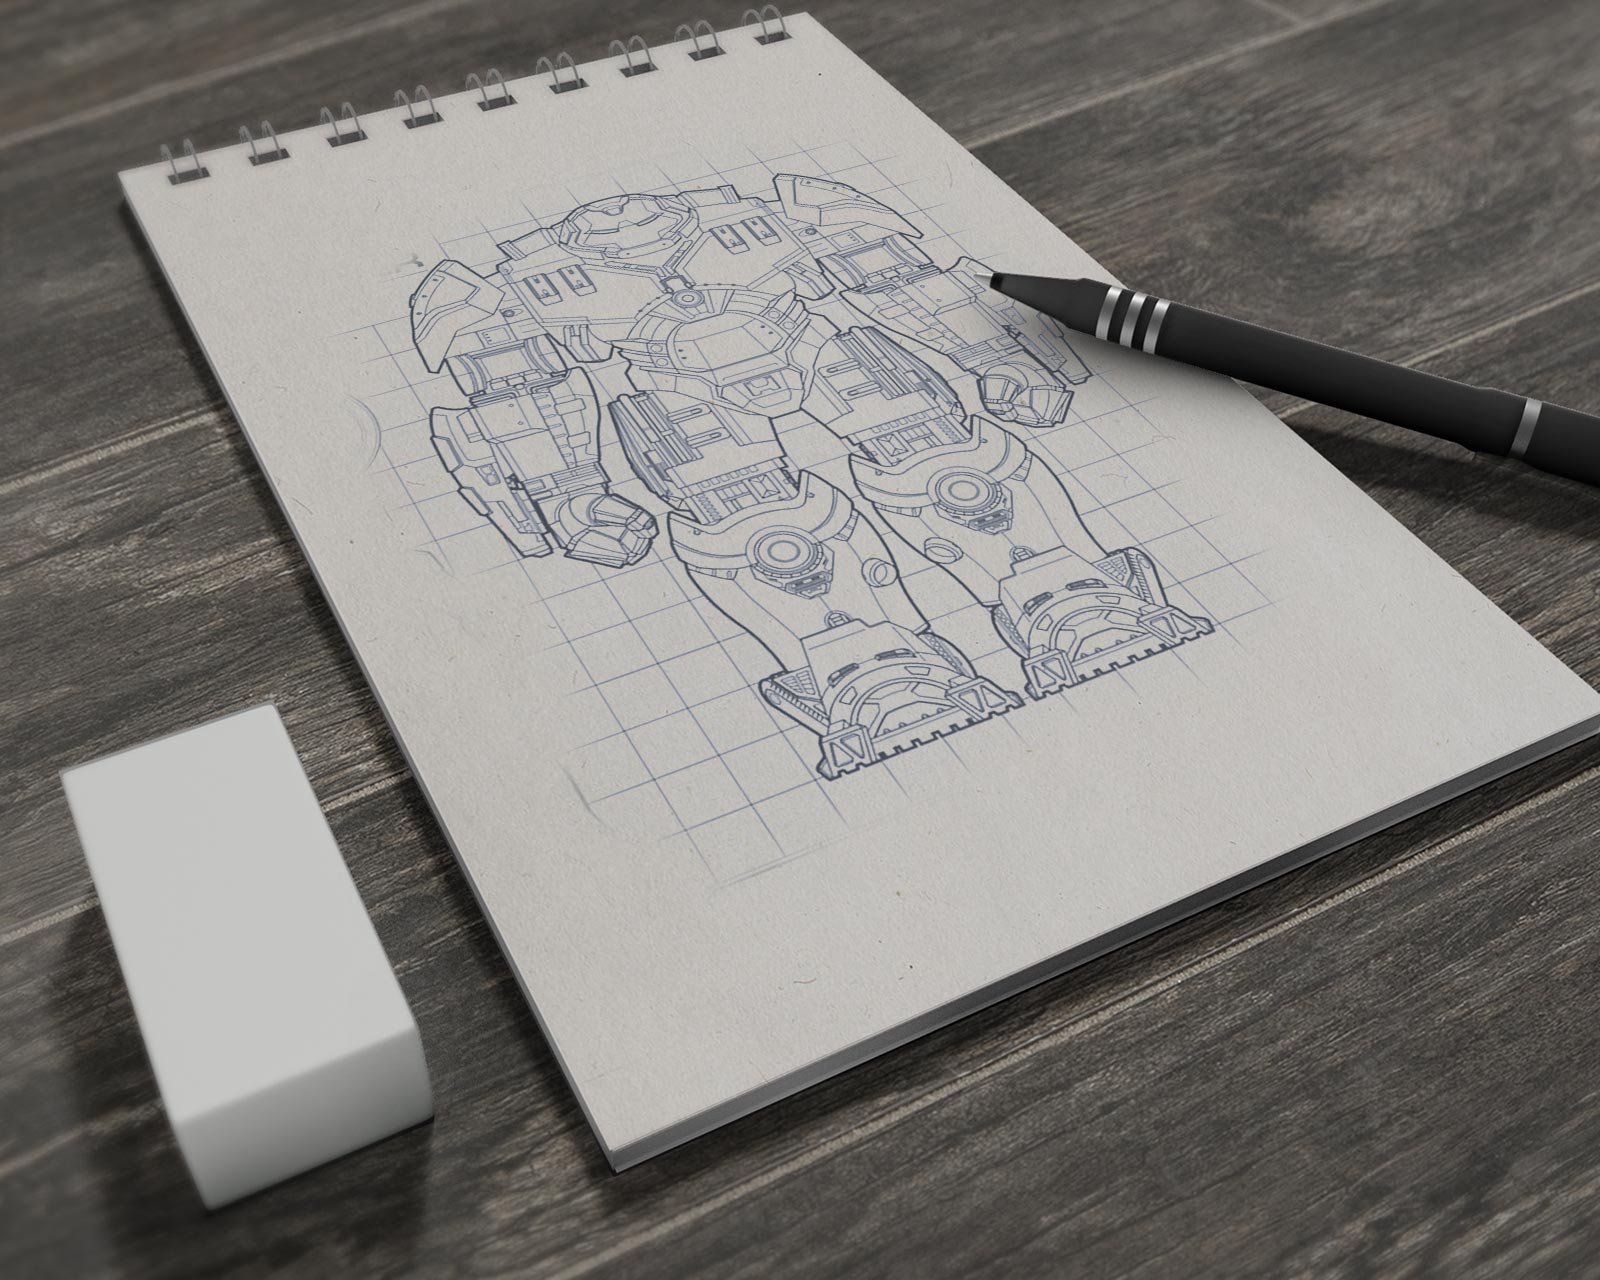 Creative Drawing Sketch Free Online with Pencil